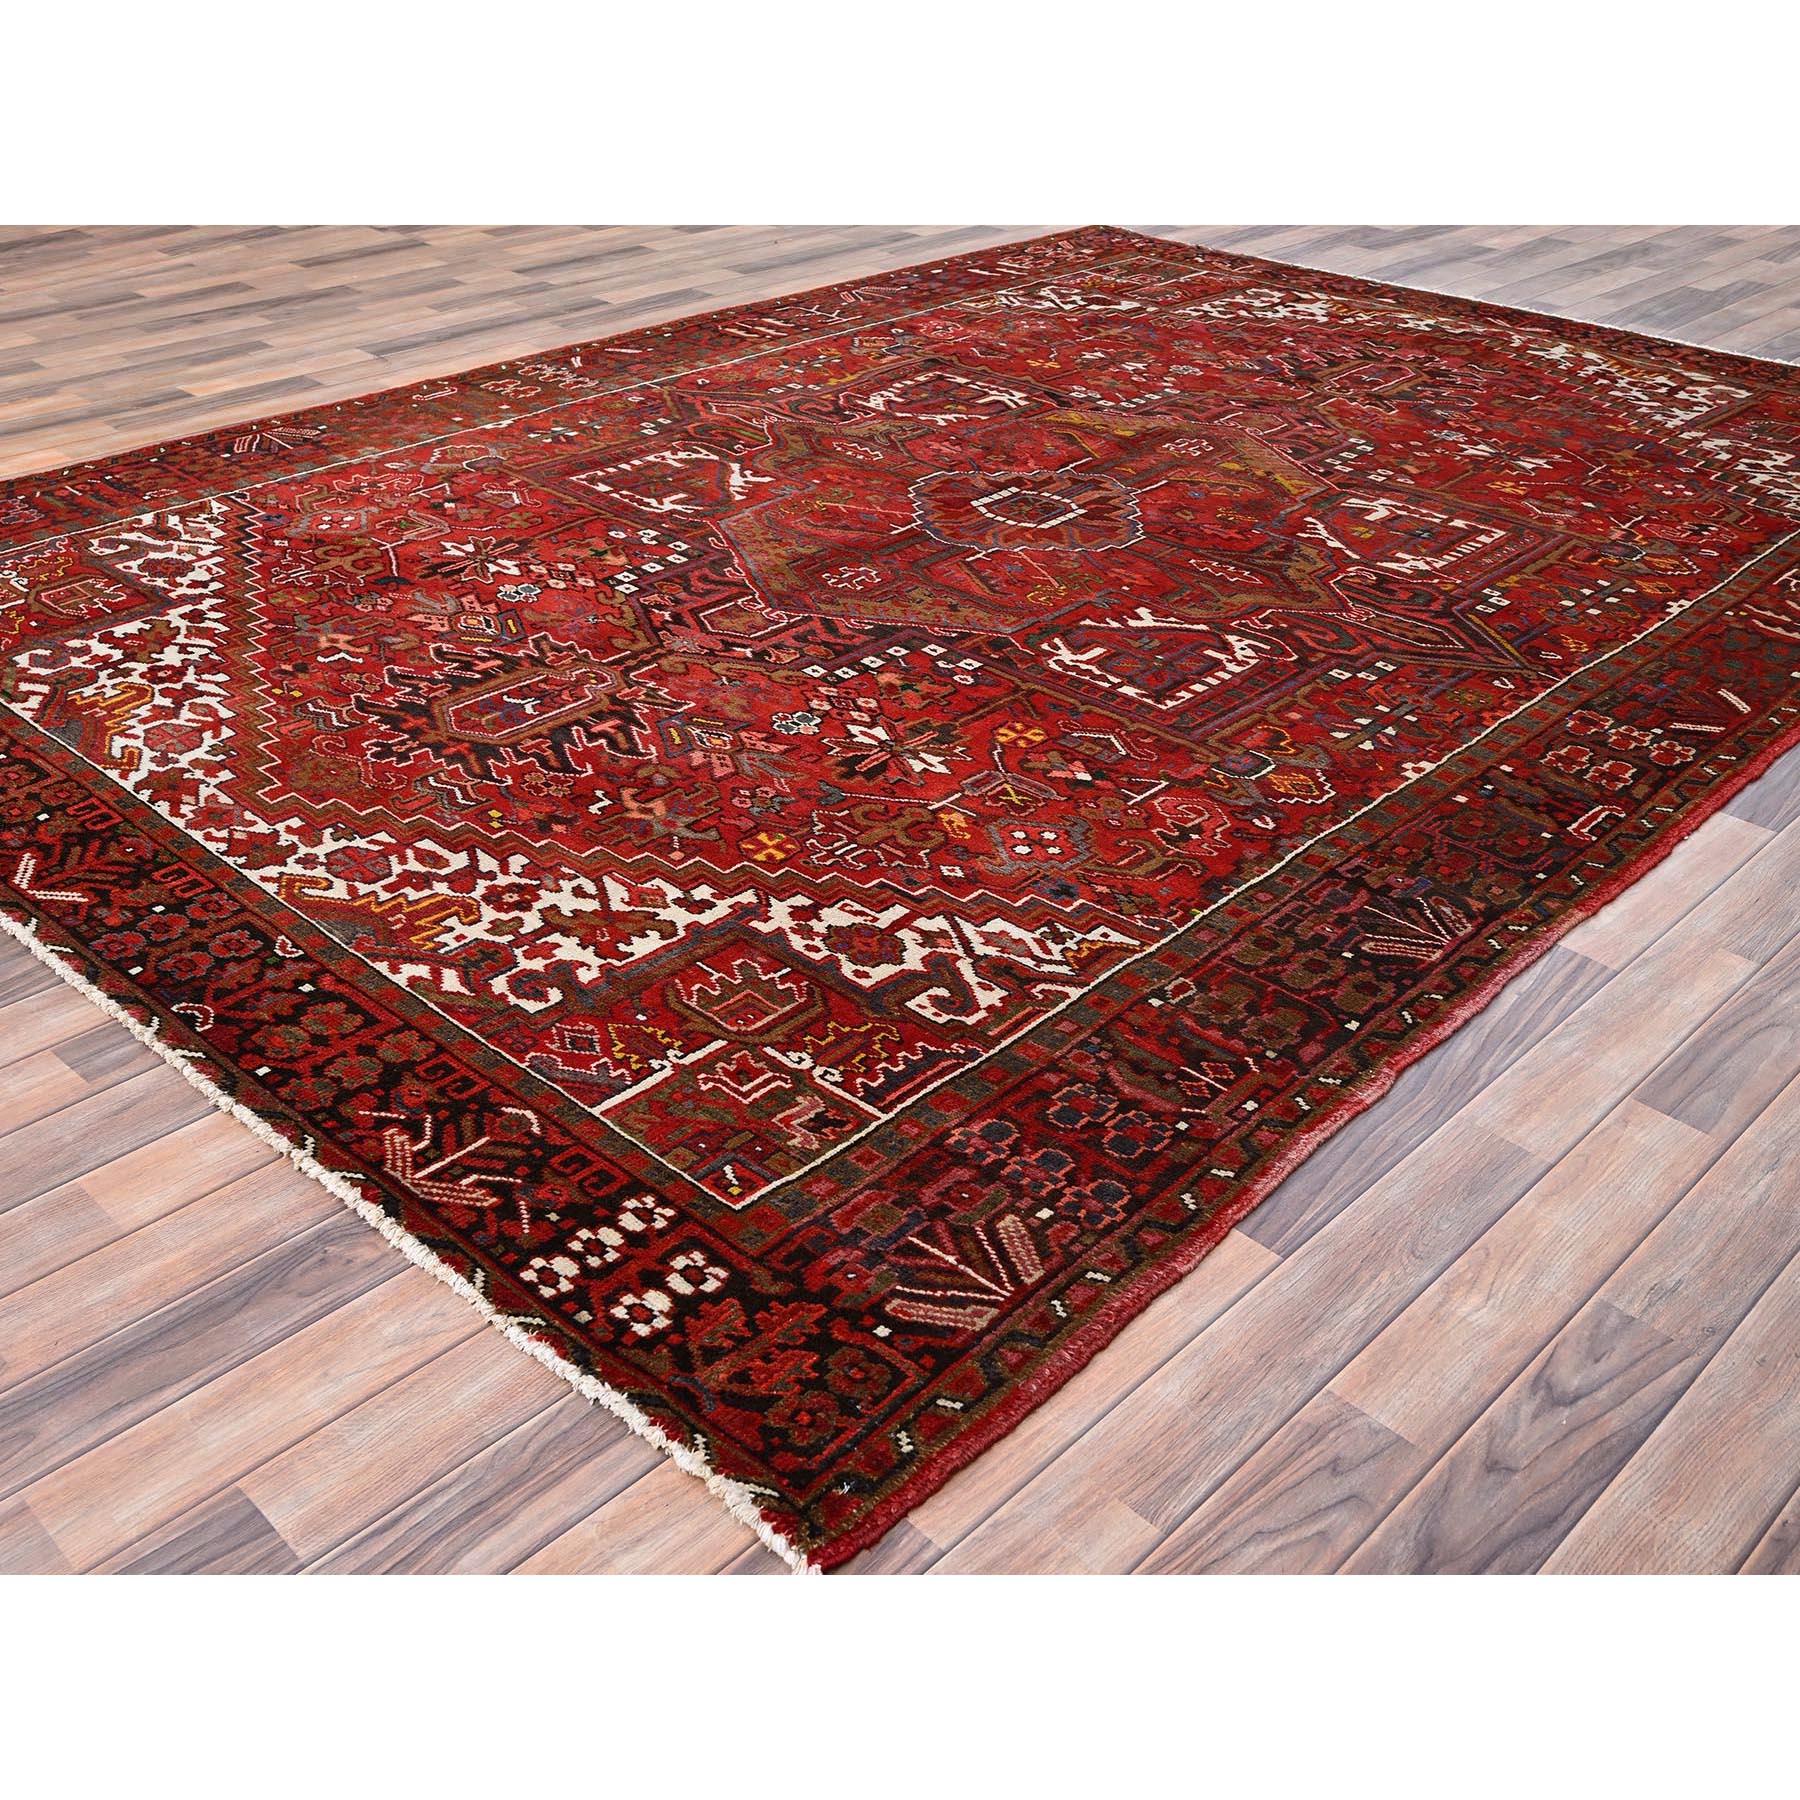 Imperial Red Semi Antique Persian Heriz Rustic Feel Worn Wool Hand Knotted Rug In Good Condition For Sale In Carlstadt, NJ